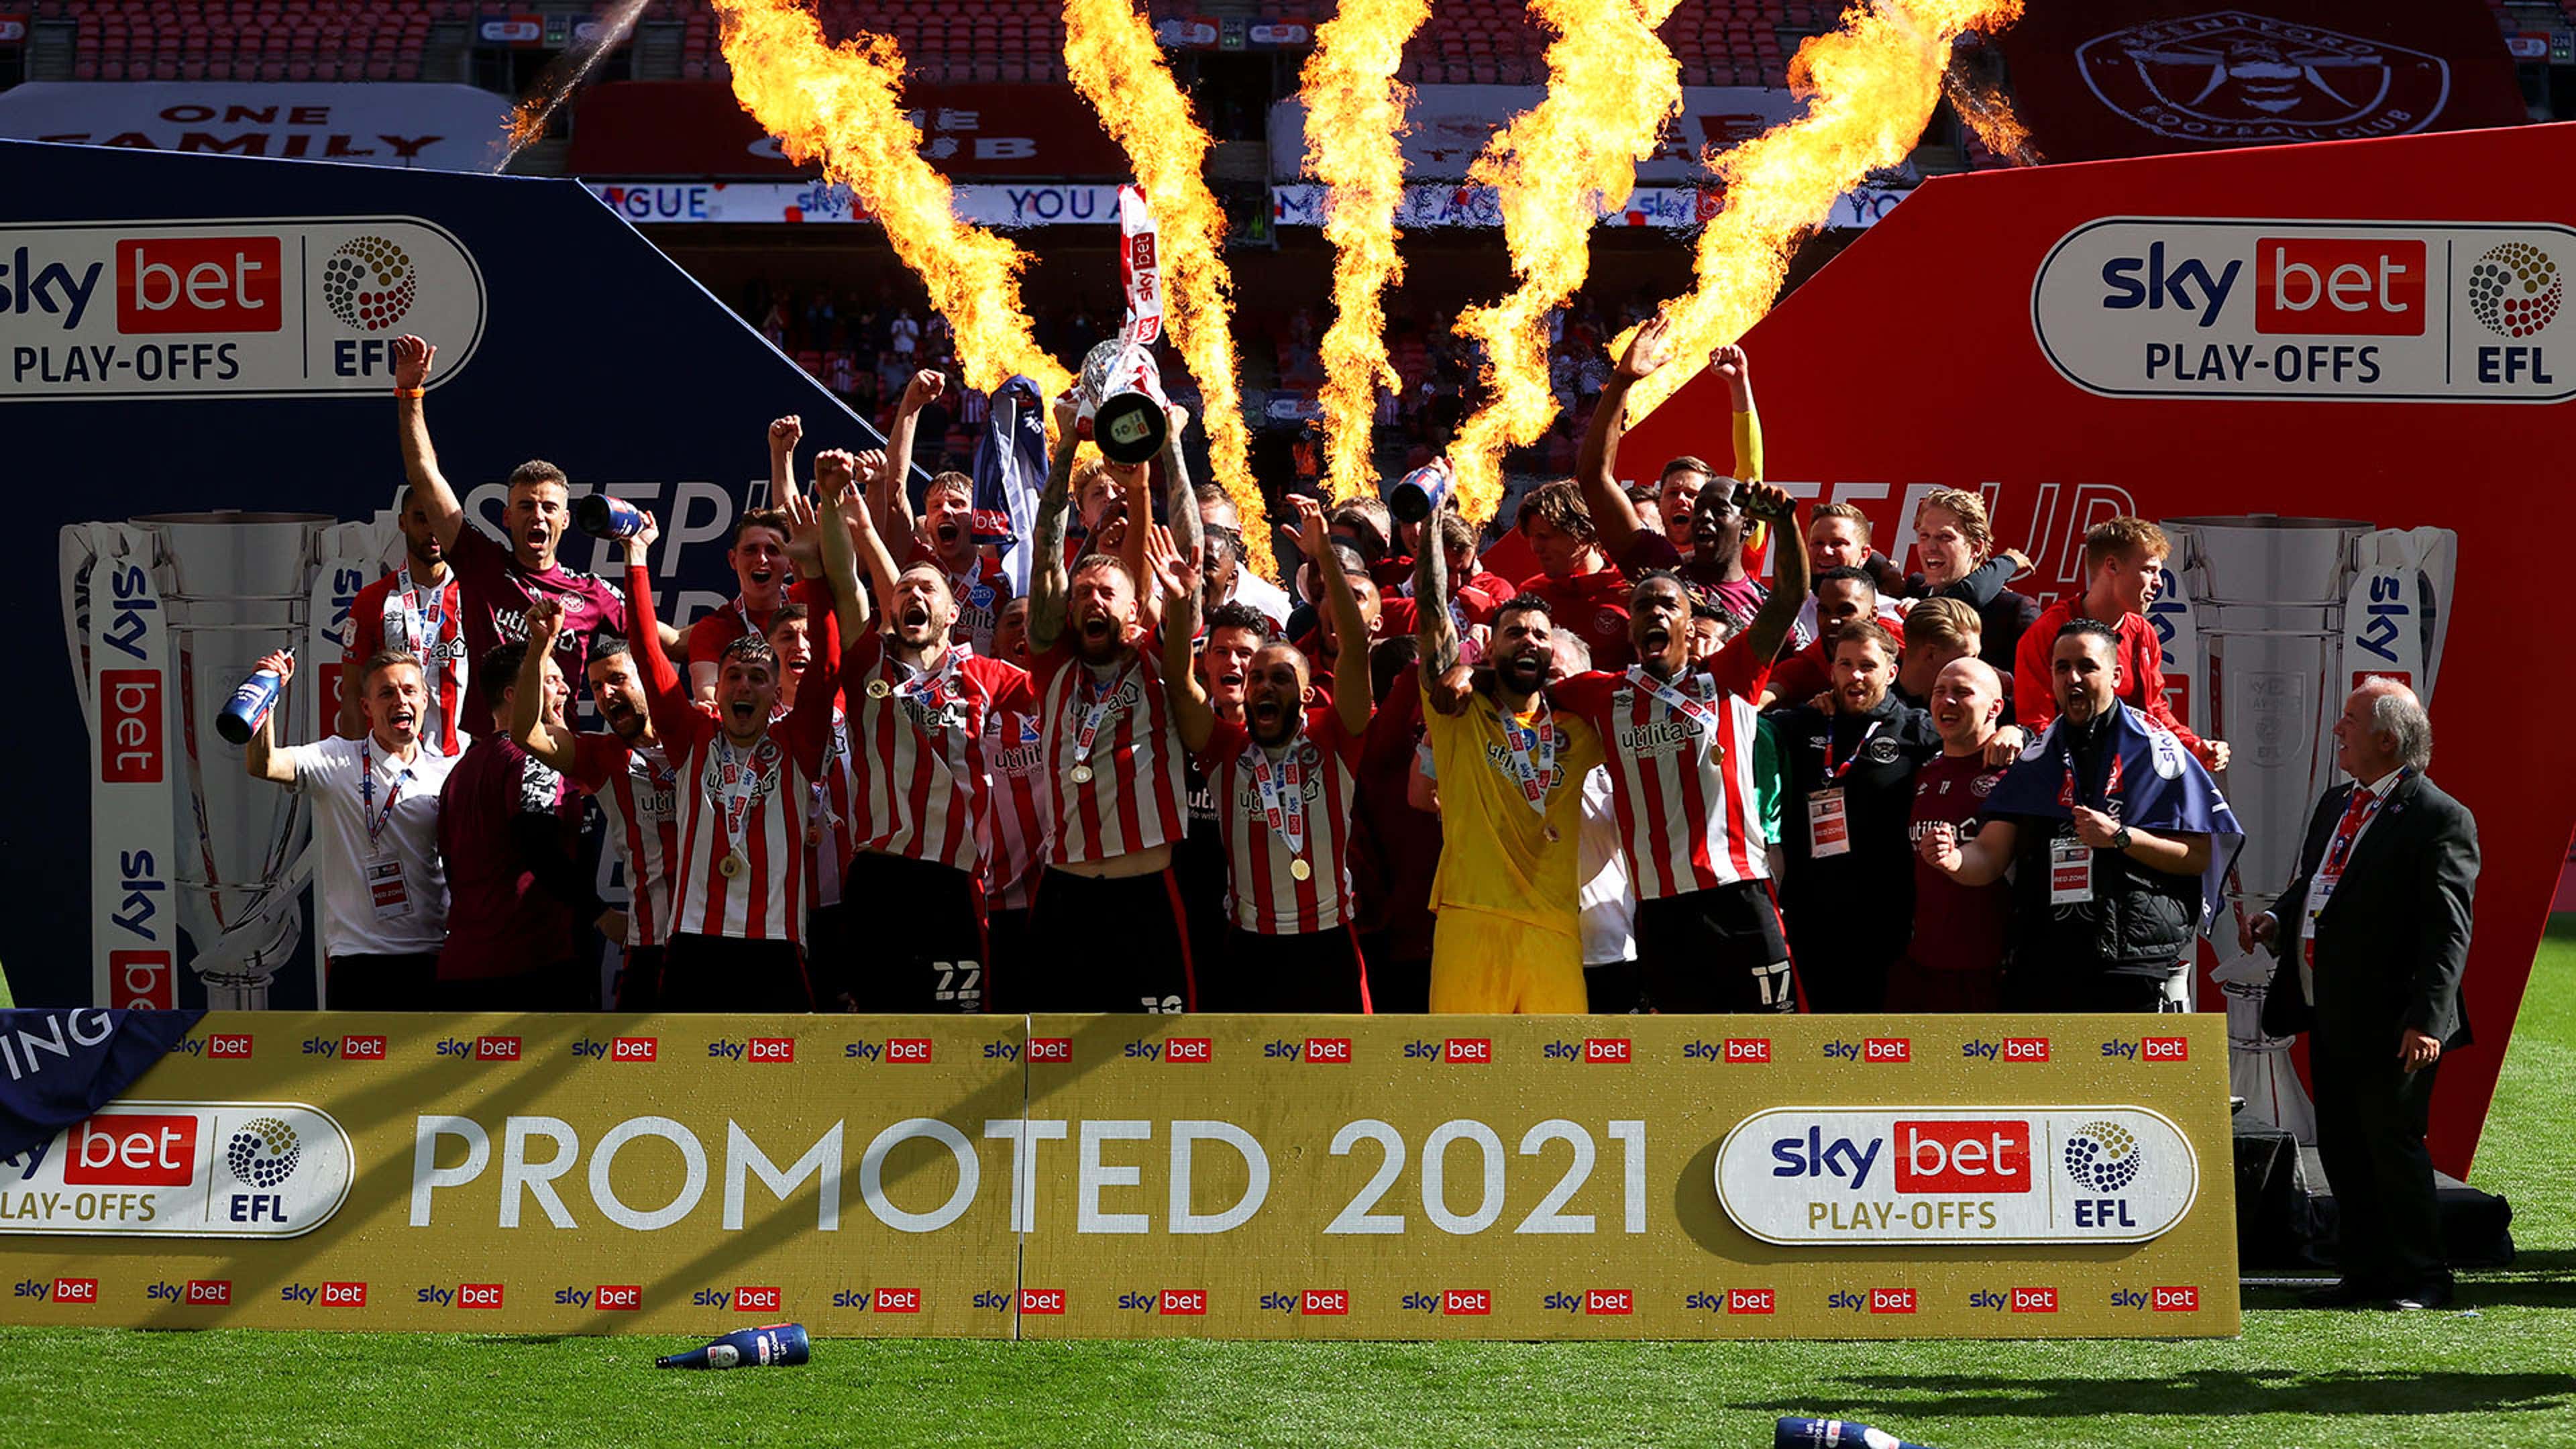 EFL - There are 11 more Sky Bet Championship fixtures to